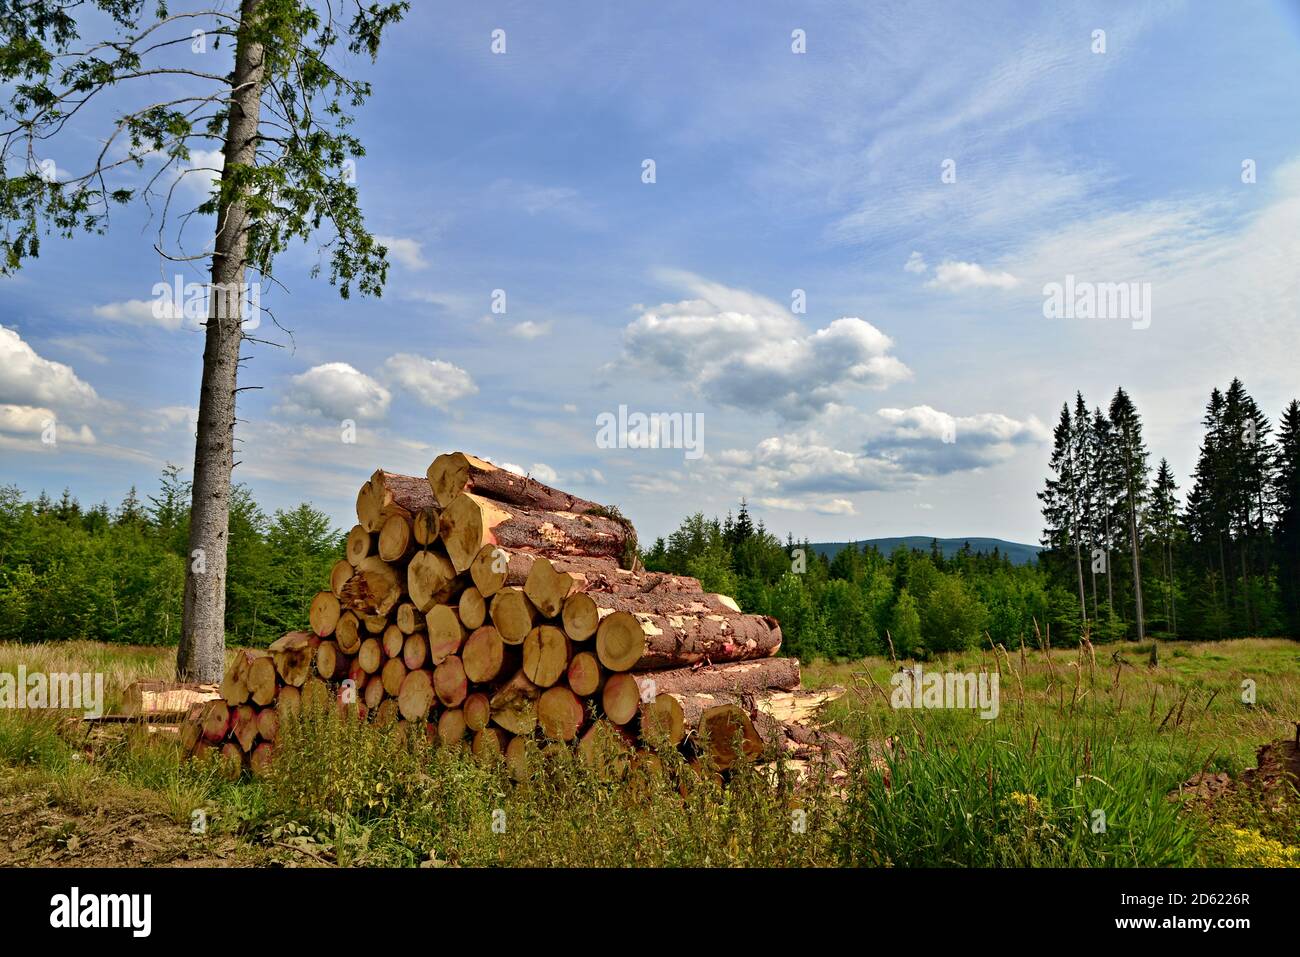 A pile of cut wood in the middle of a green meadow. The last tree at the folded wooden logs. Background with green trees and blue sky with white cloud Stock Photo